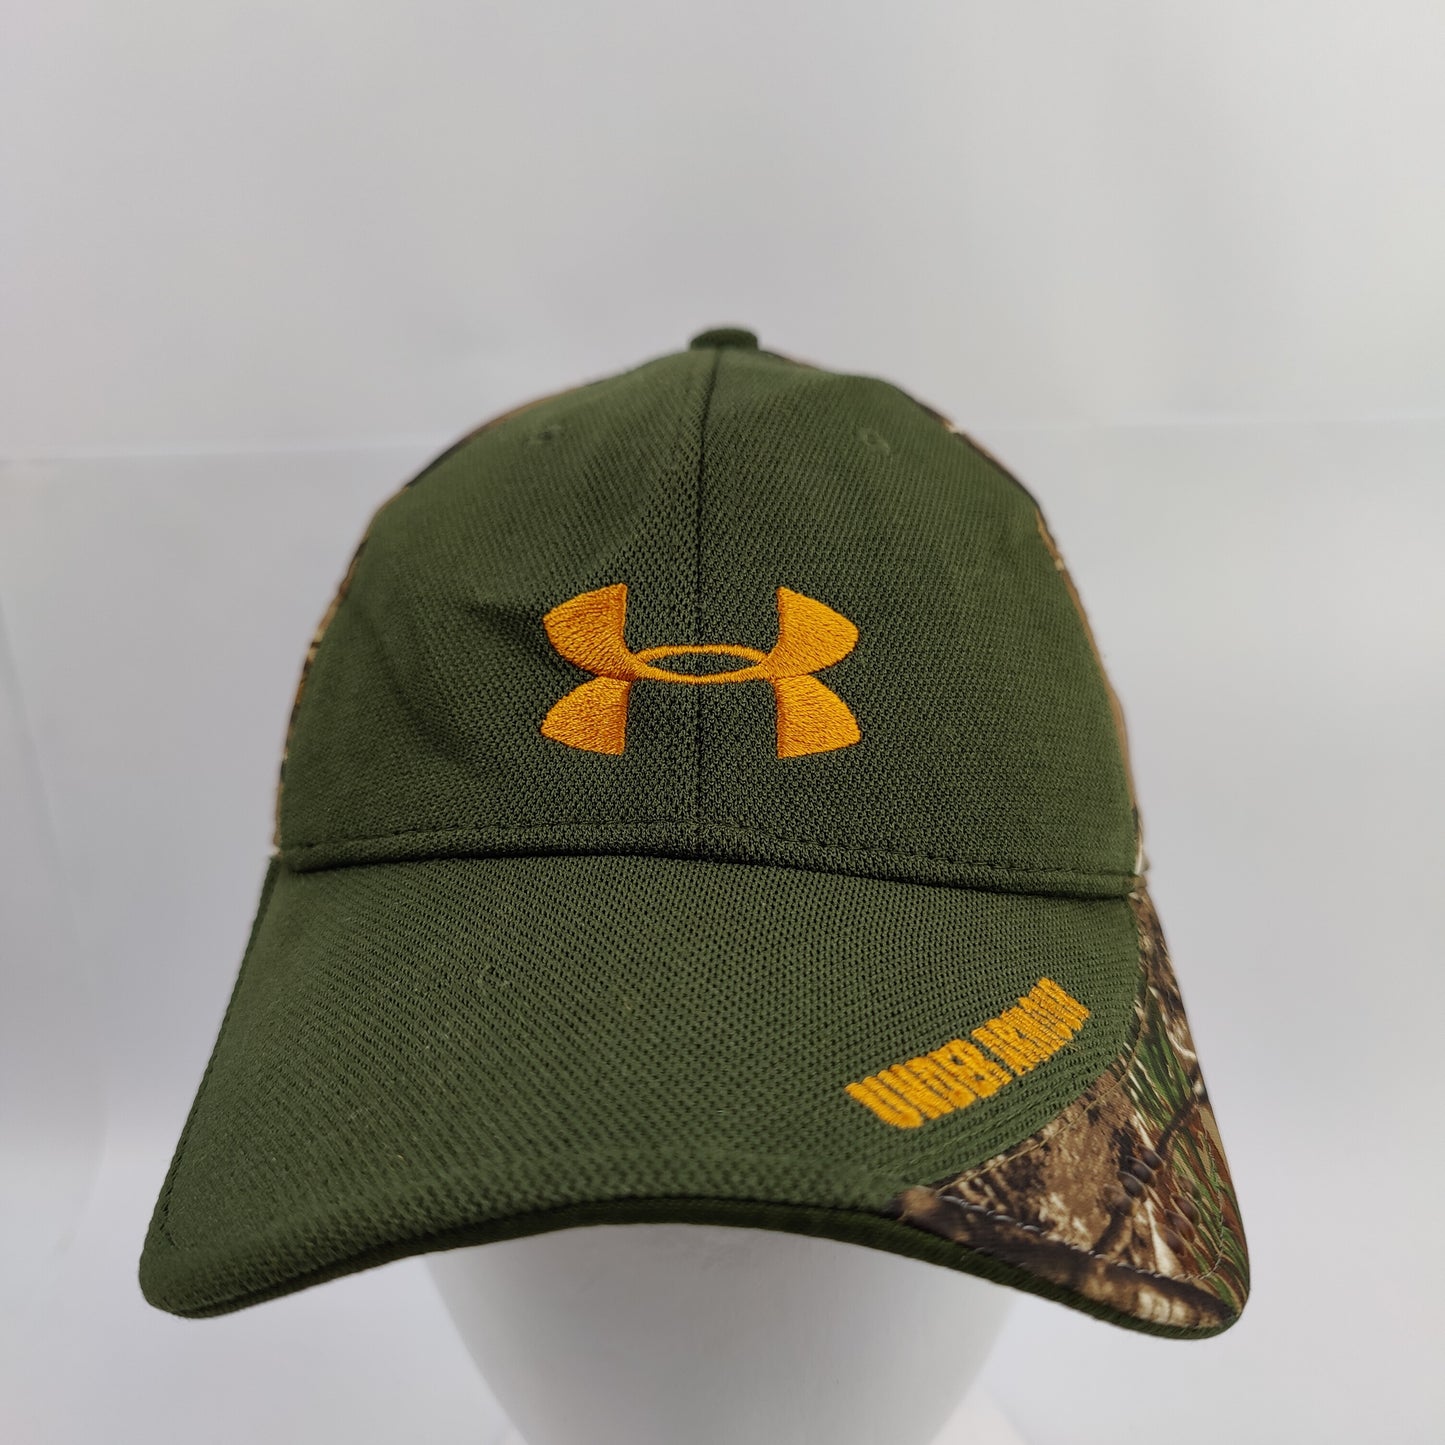 Under Armour RealTree Rimfire Fitted Cap - Green/Camo - 1039